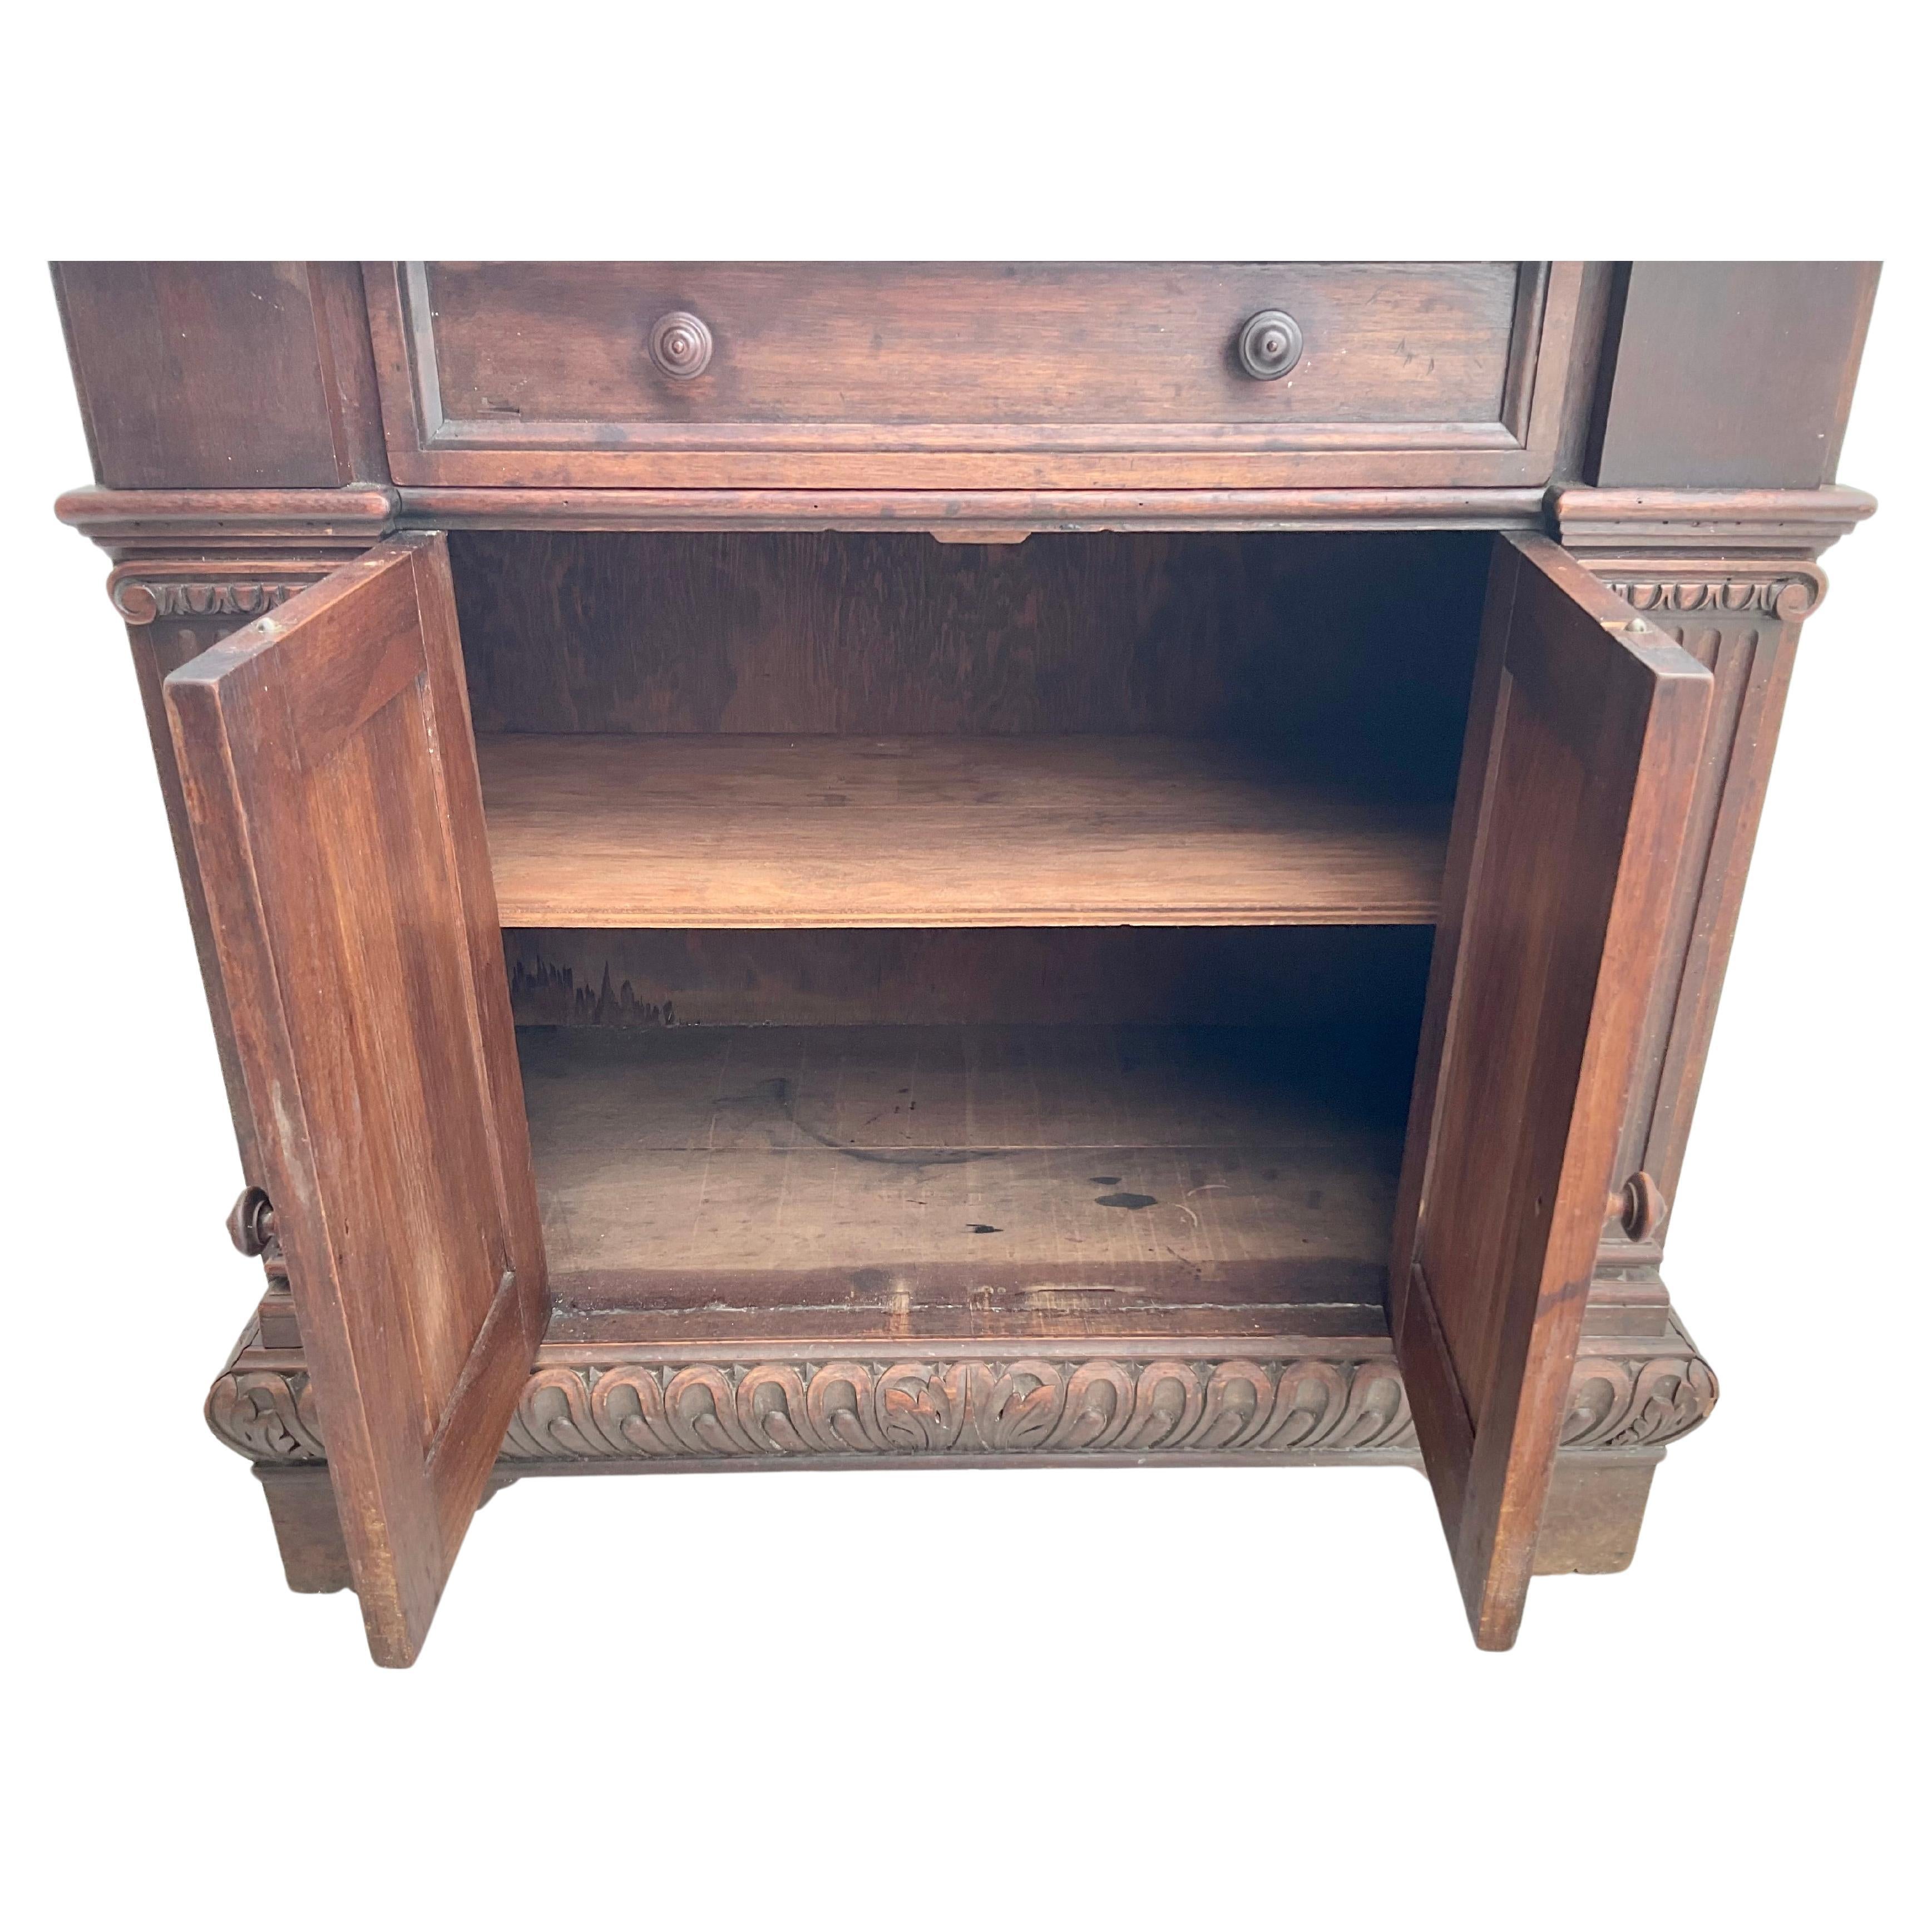 19th century Renaissance style carved walnut cabinet or server with lower compartment and 1 drawer. Fluted columns on both sides, thumb molded top edge and apron, giving this piece a great architectural design. Warm pleasing patina.